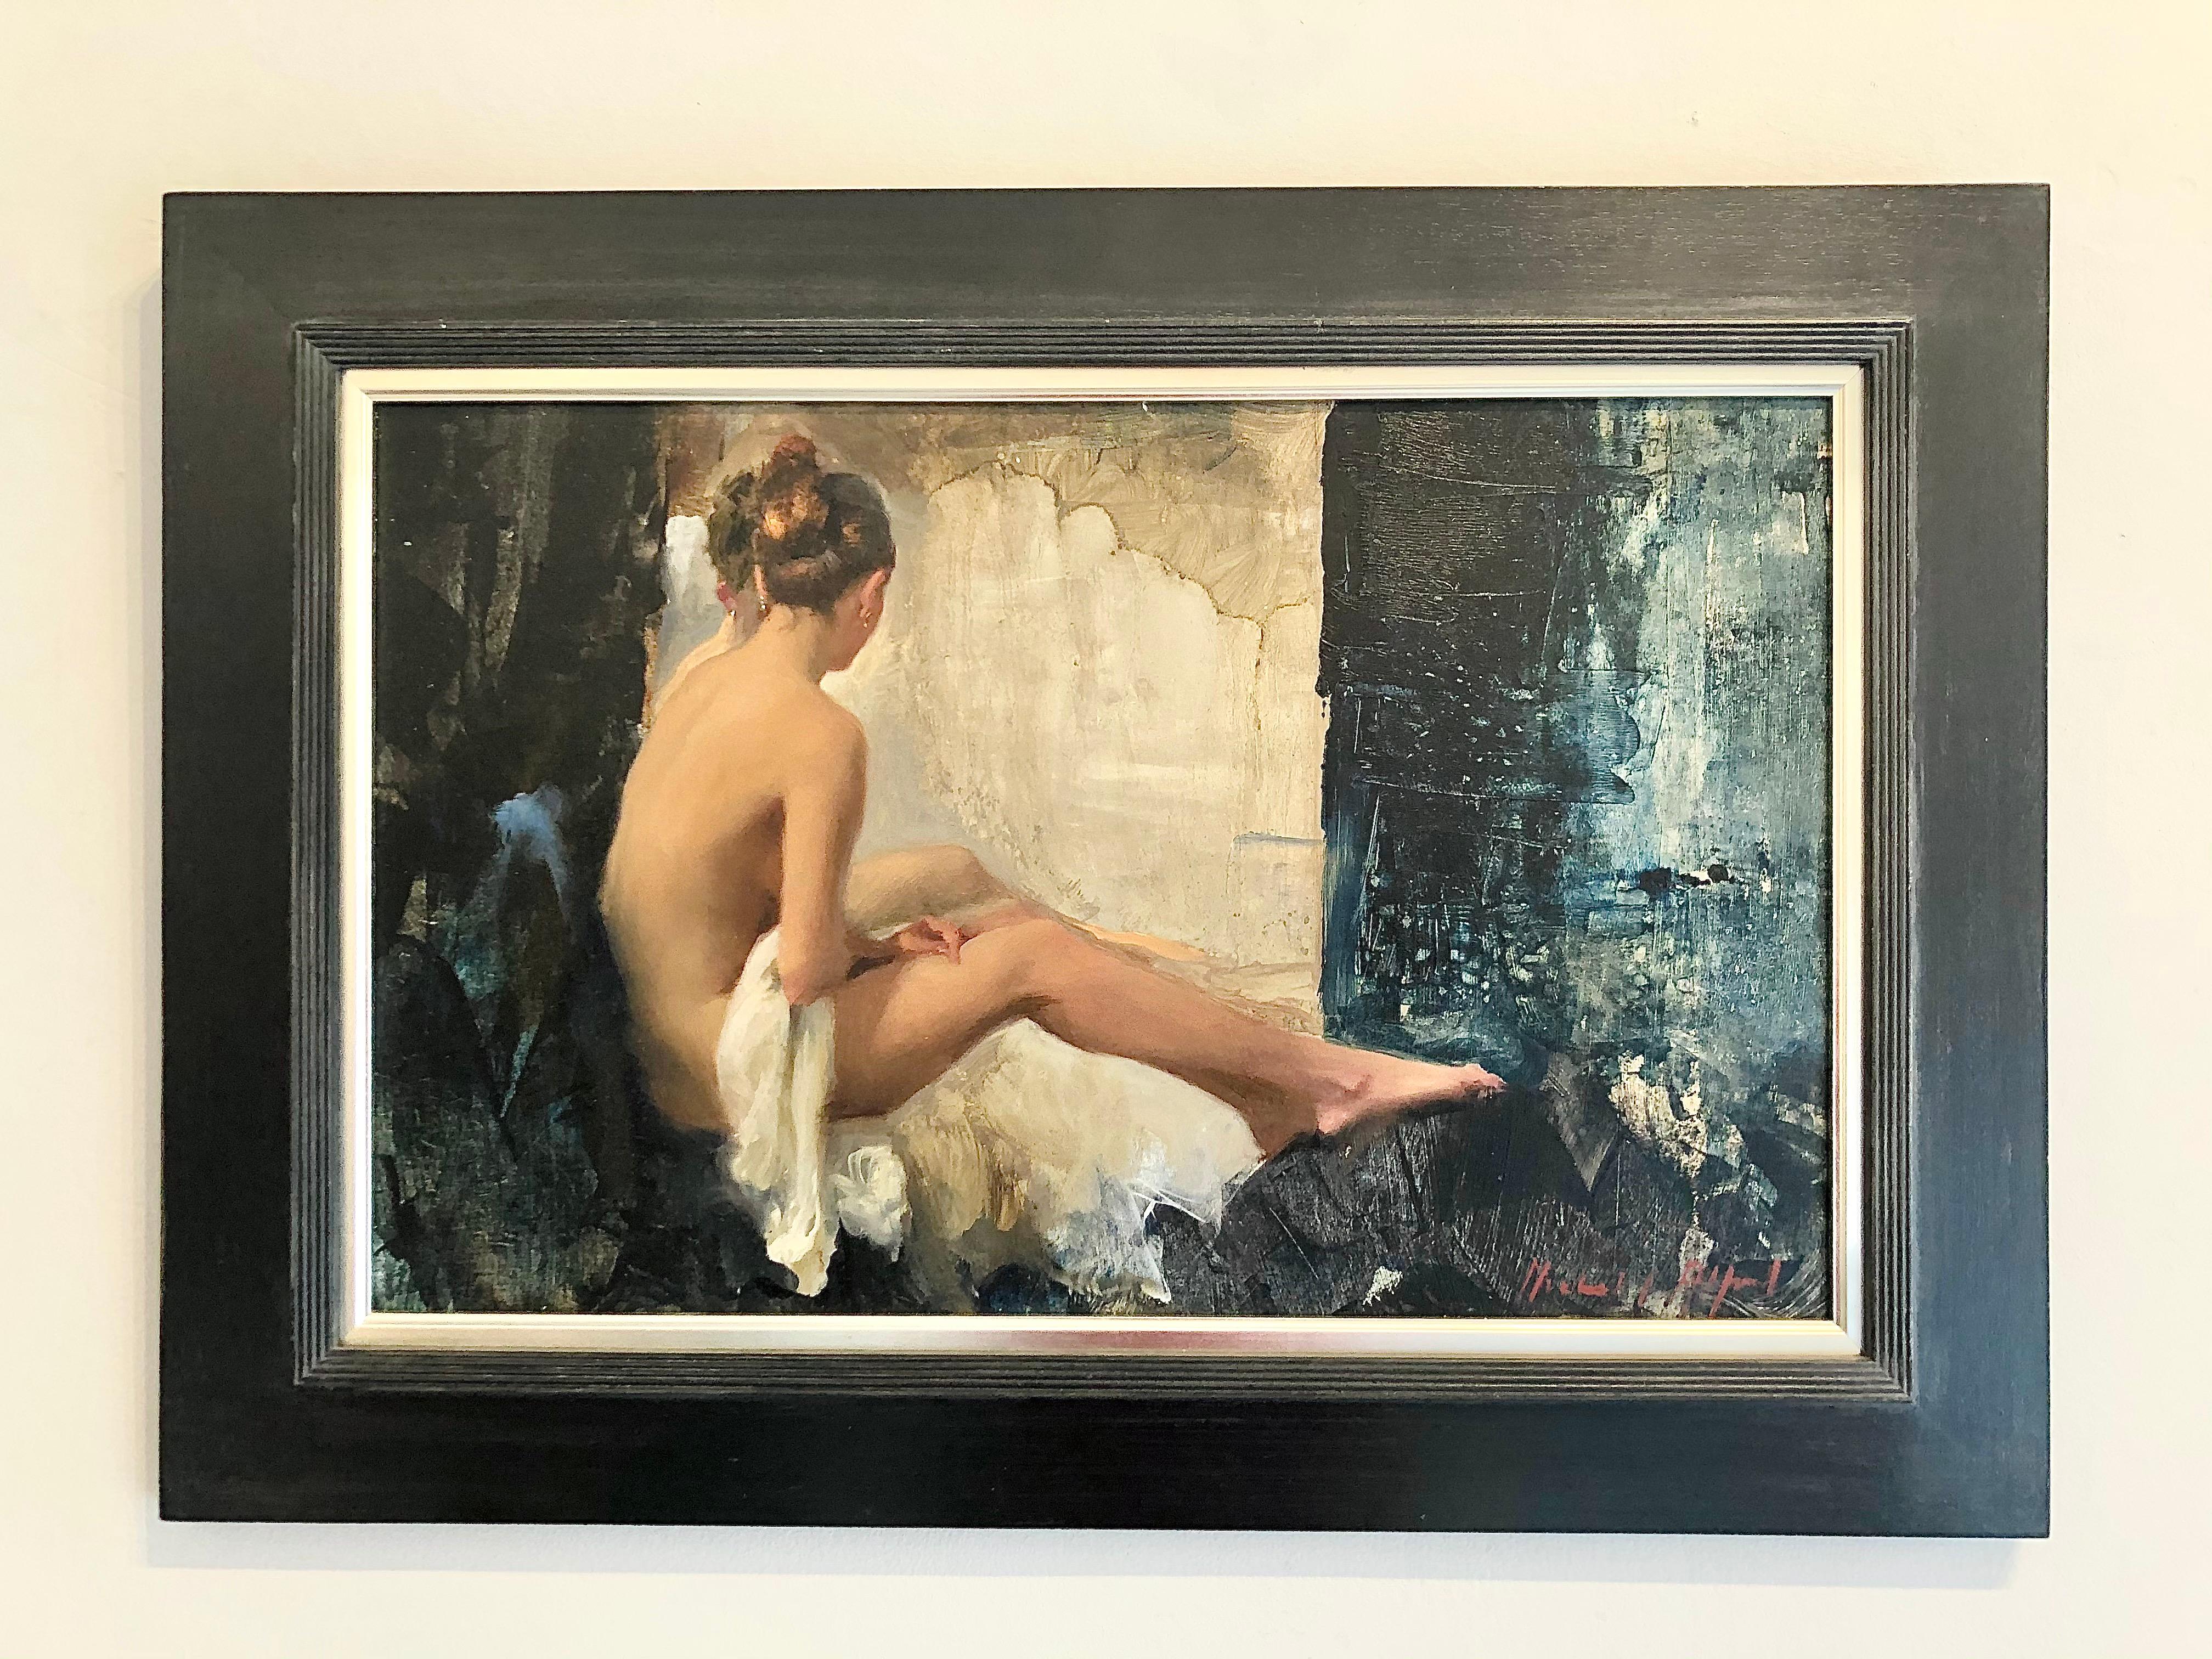 Nude, White Linen - human figure portraiture oil painting modern impressionsim - Painting by Michael Alford